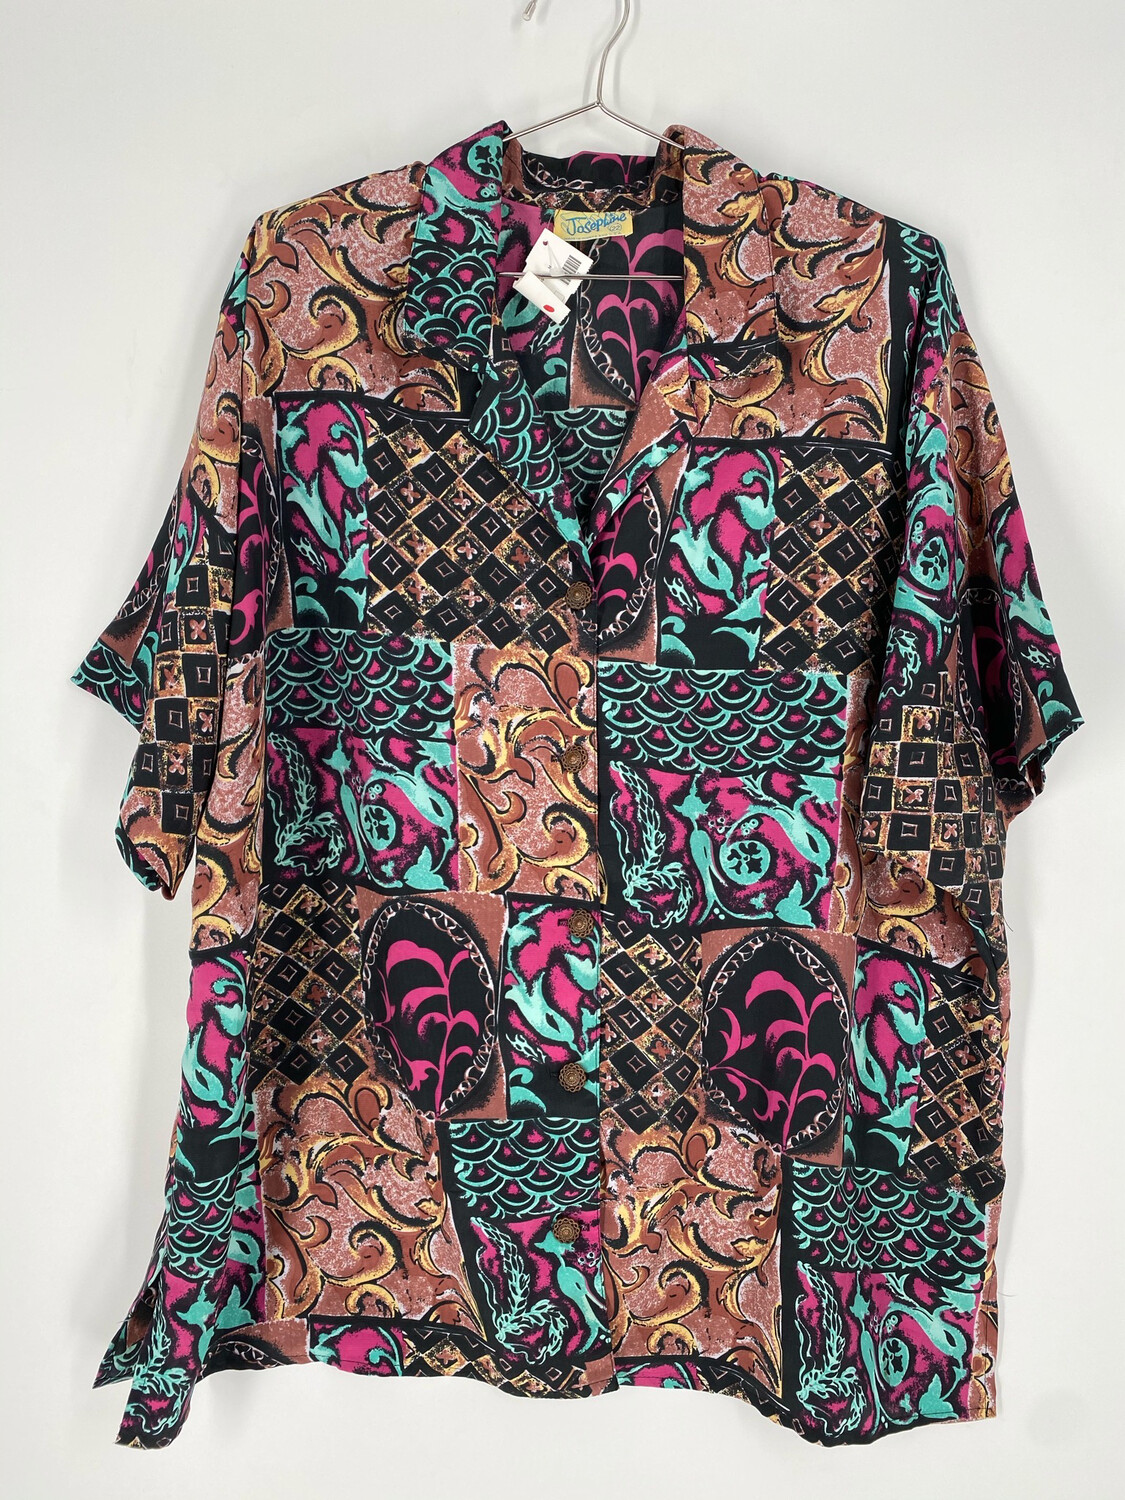 Josephine Abstract Patterned Button Up Top Size 22